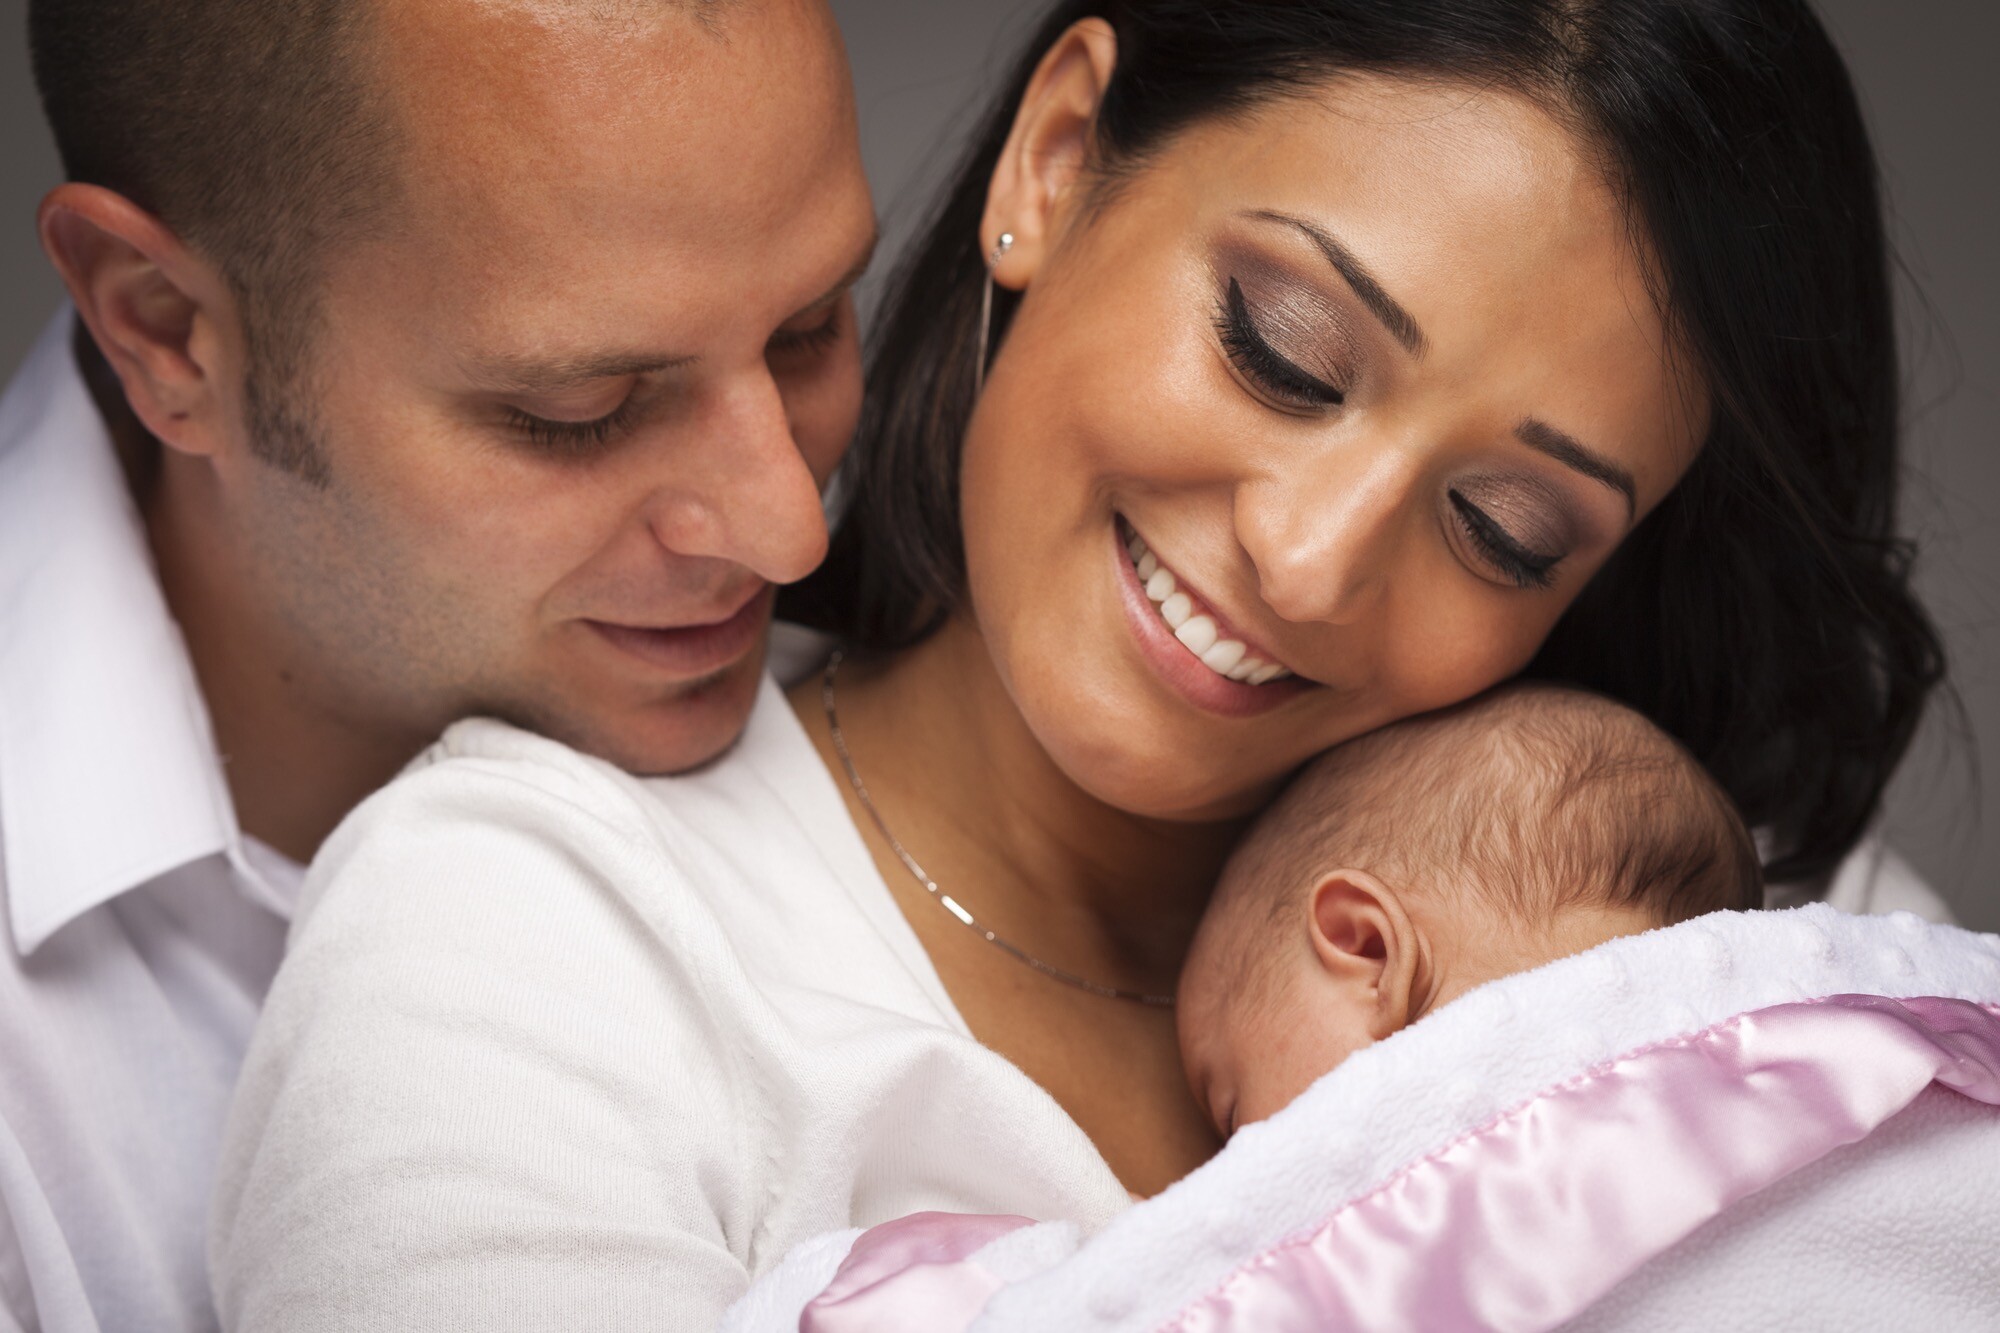 Man and woman smiling at the sleeping infant in their arms